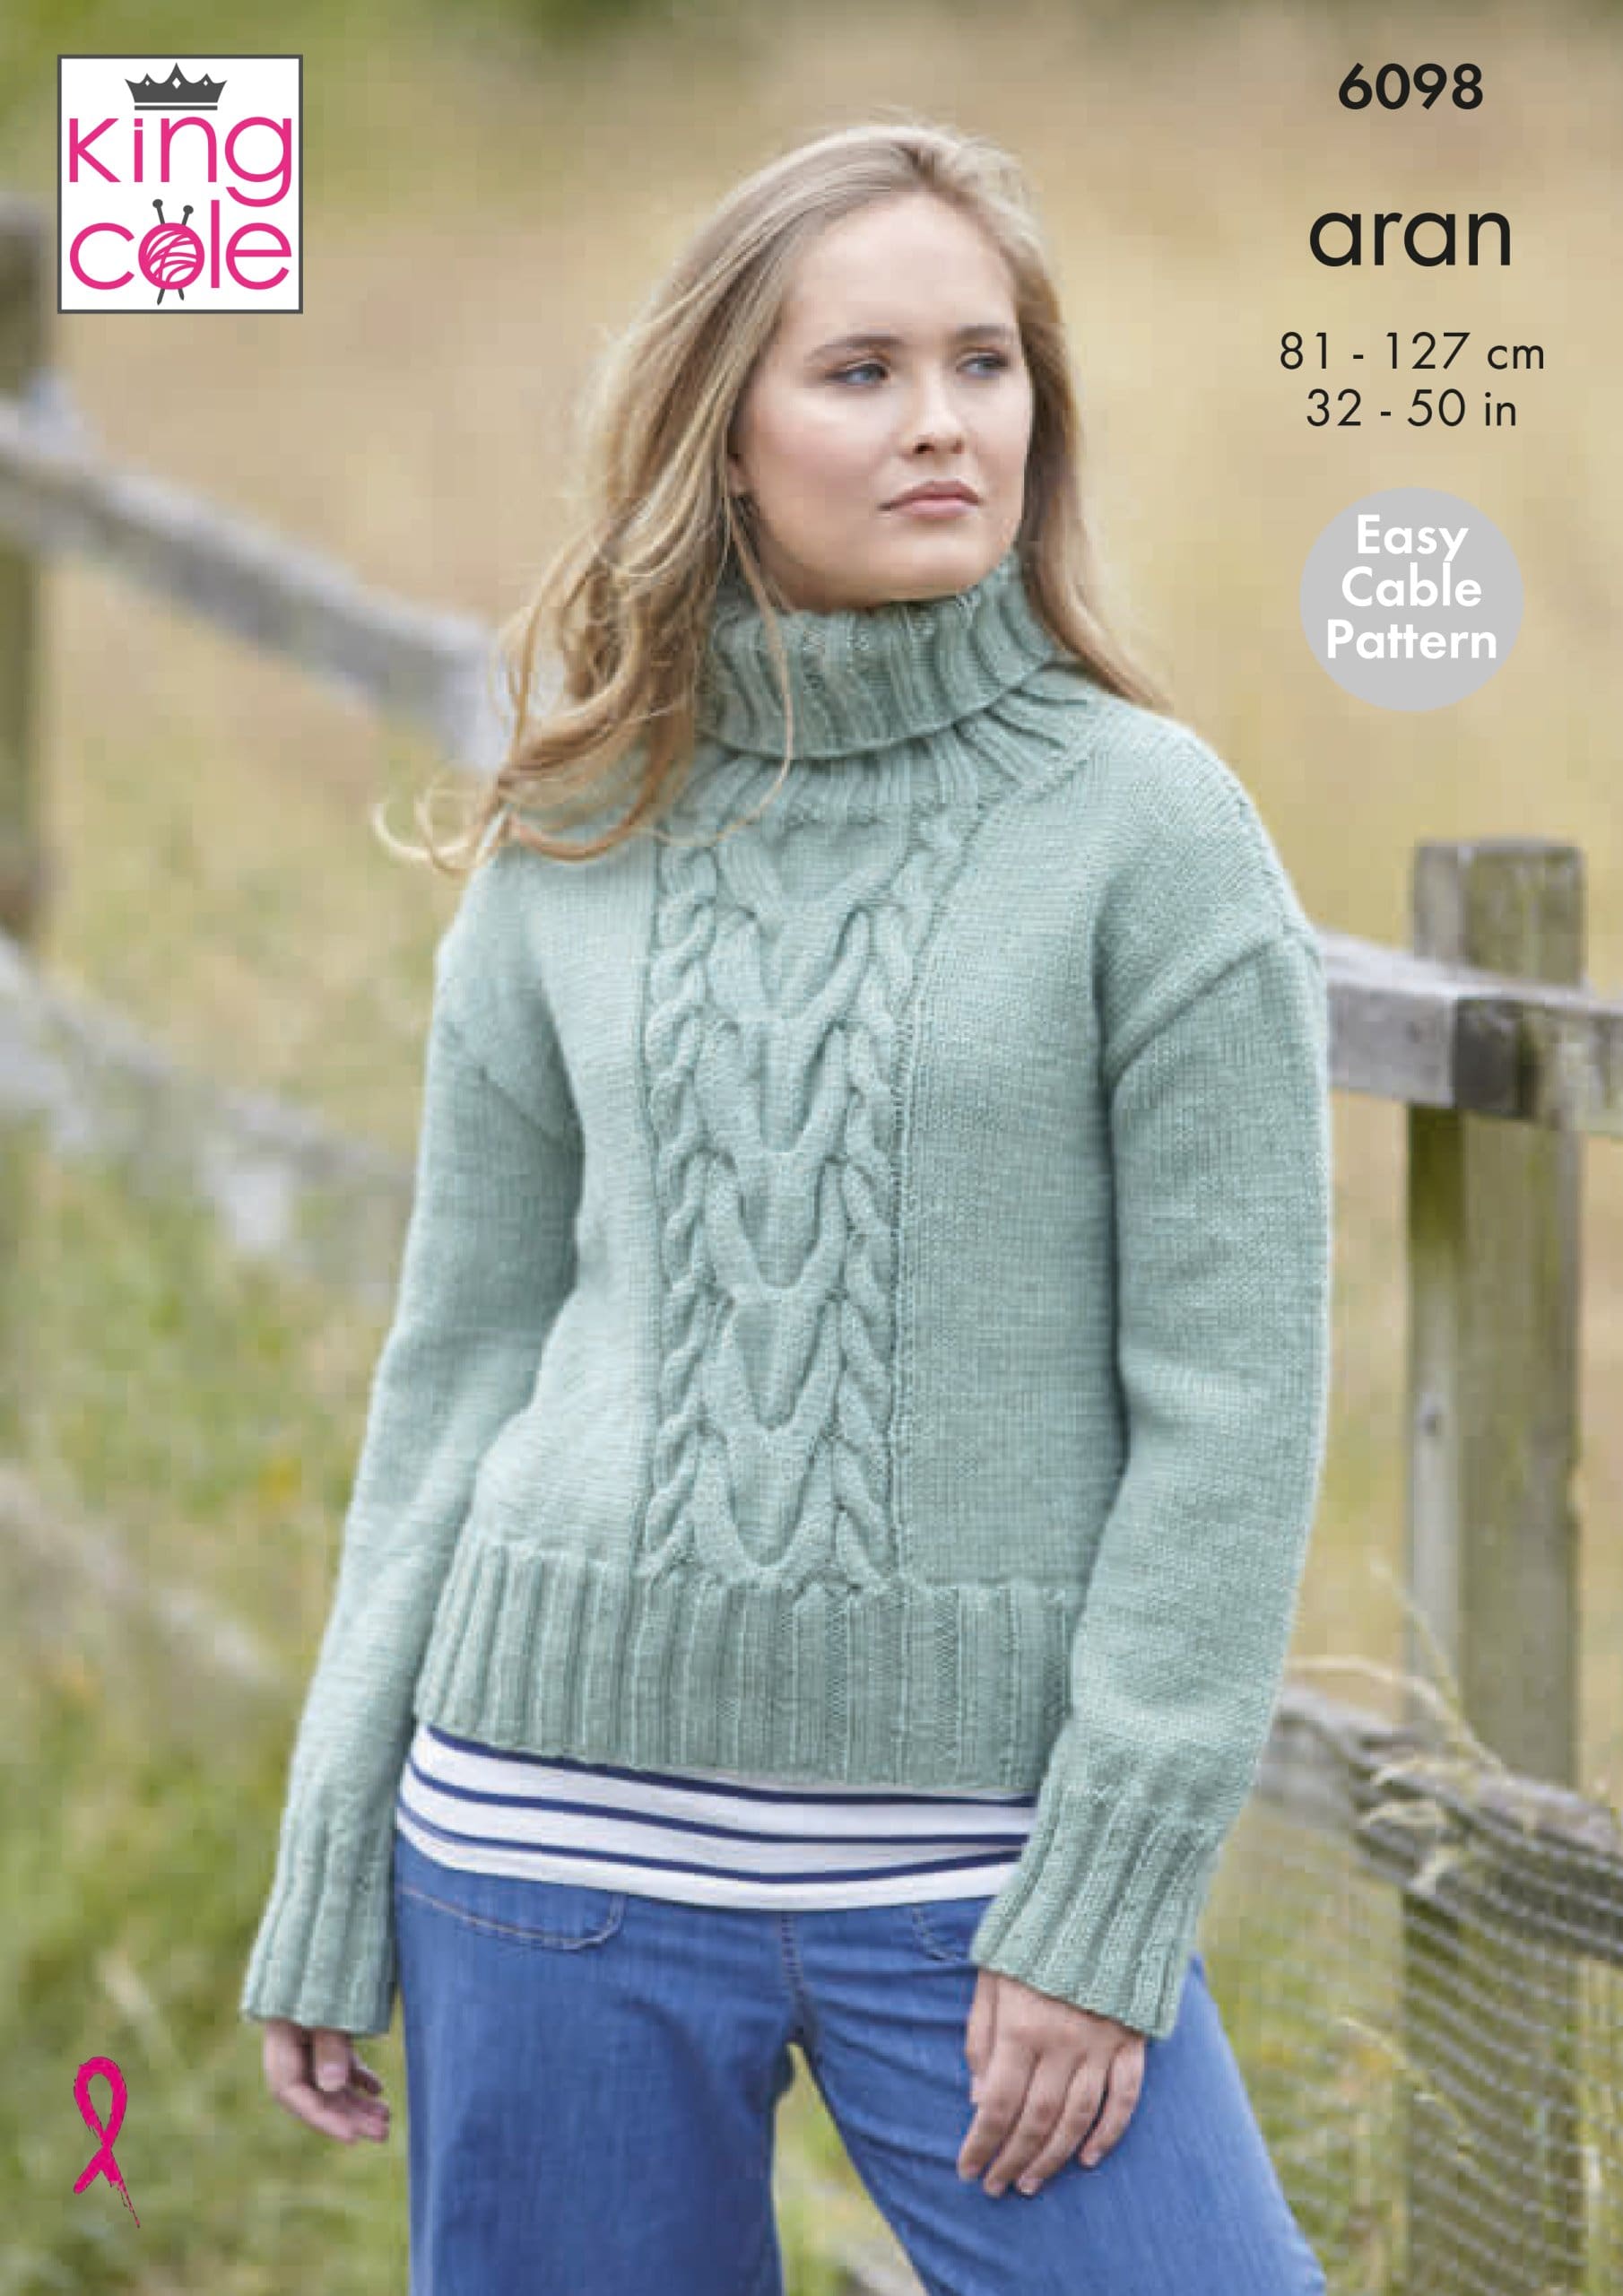 Easy to Follow Cable Sweaters Knitted in Fashion Aran Knitting Patterns ...